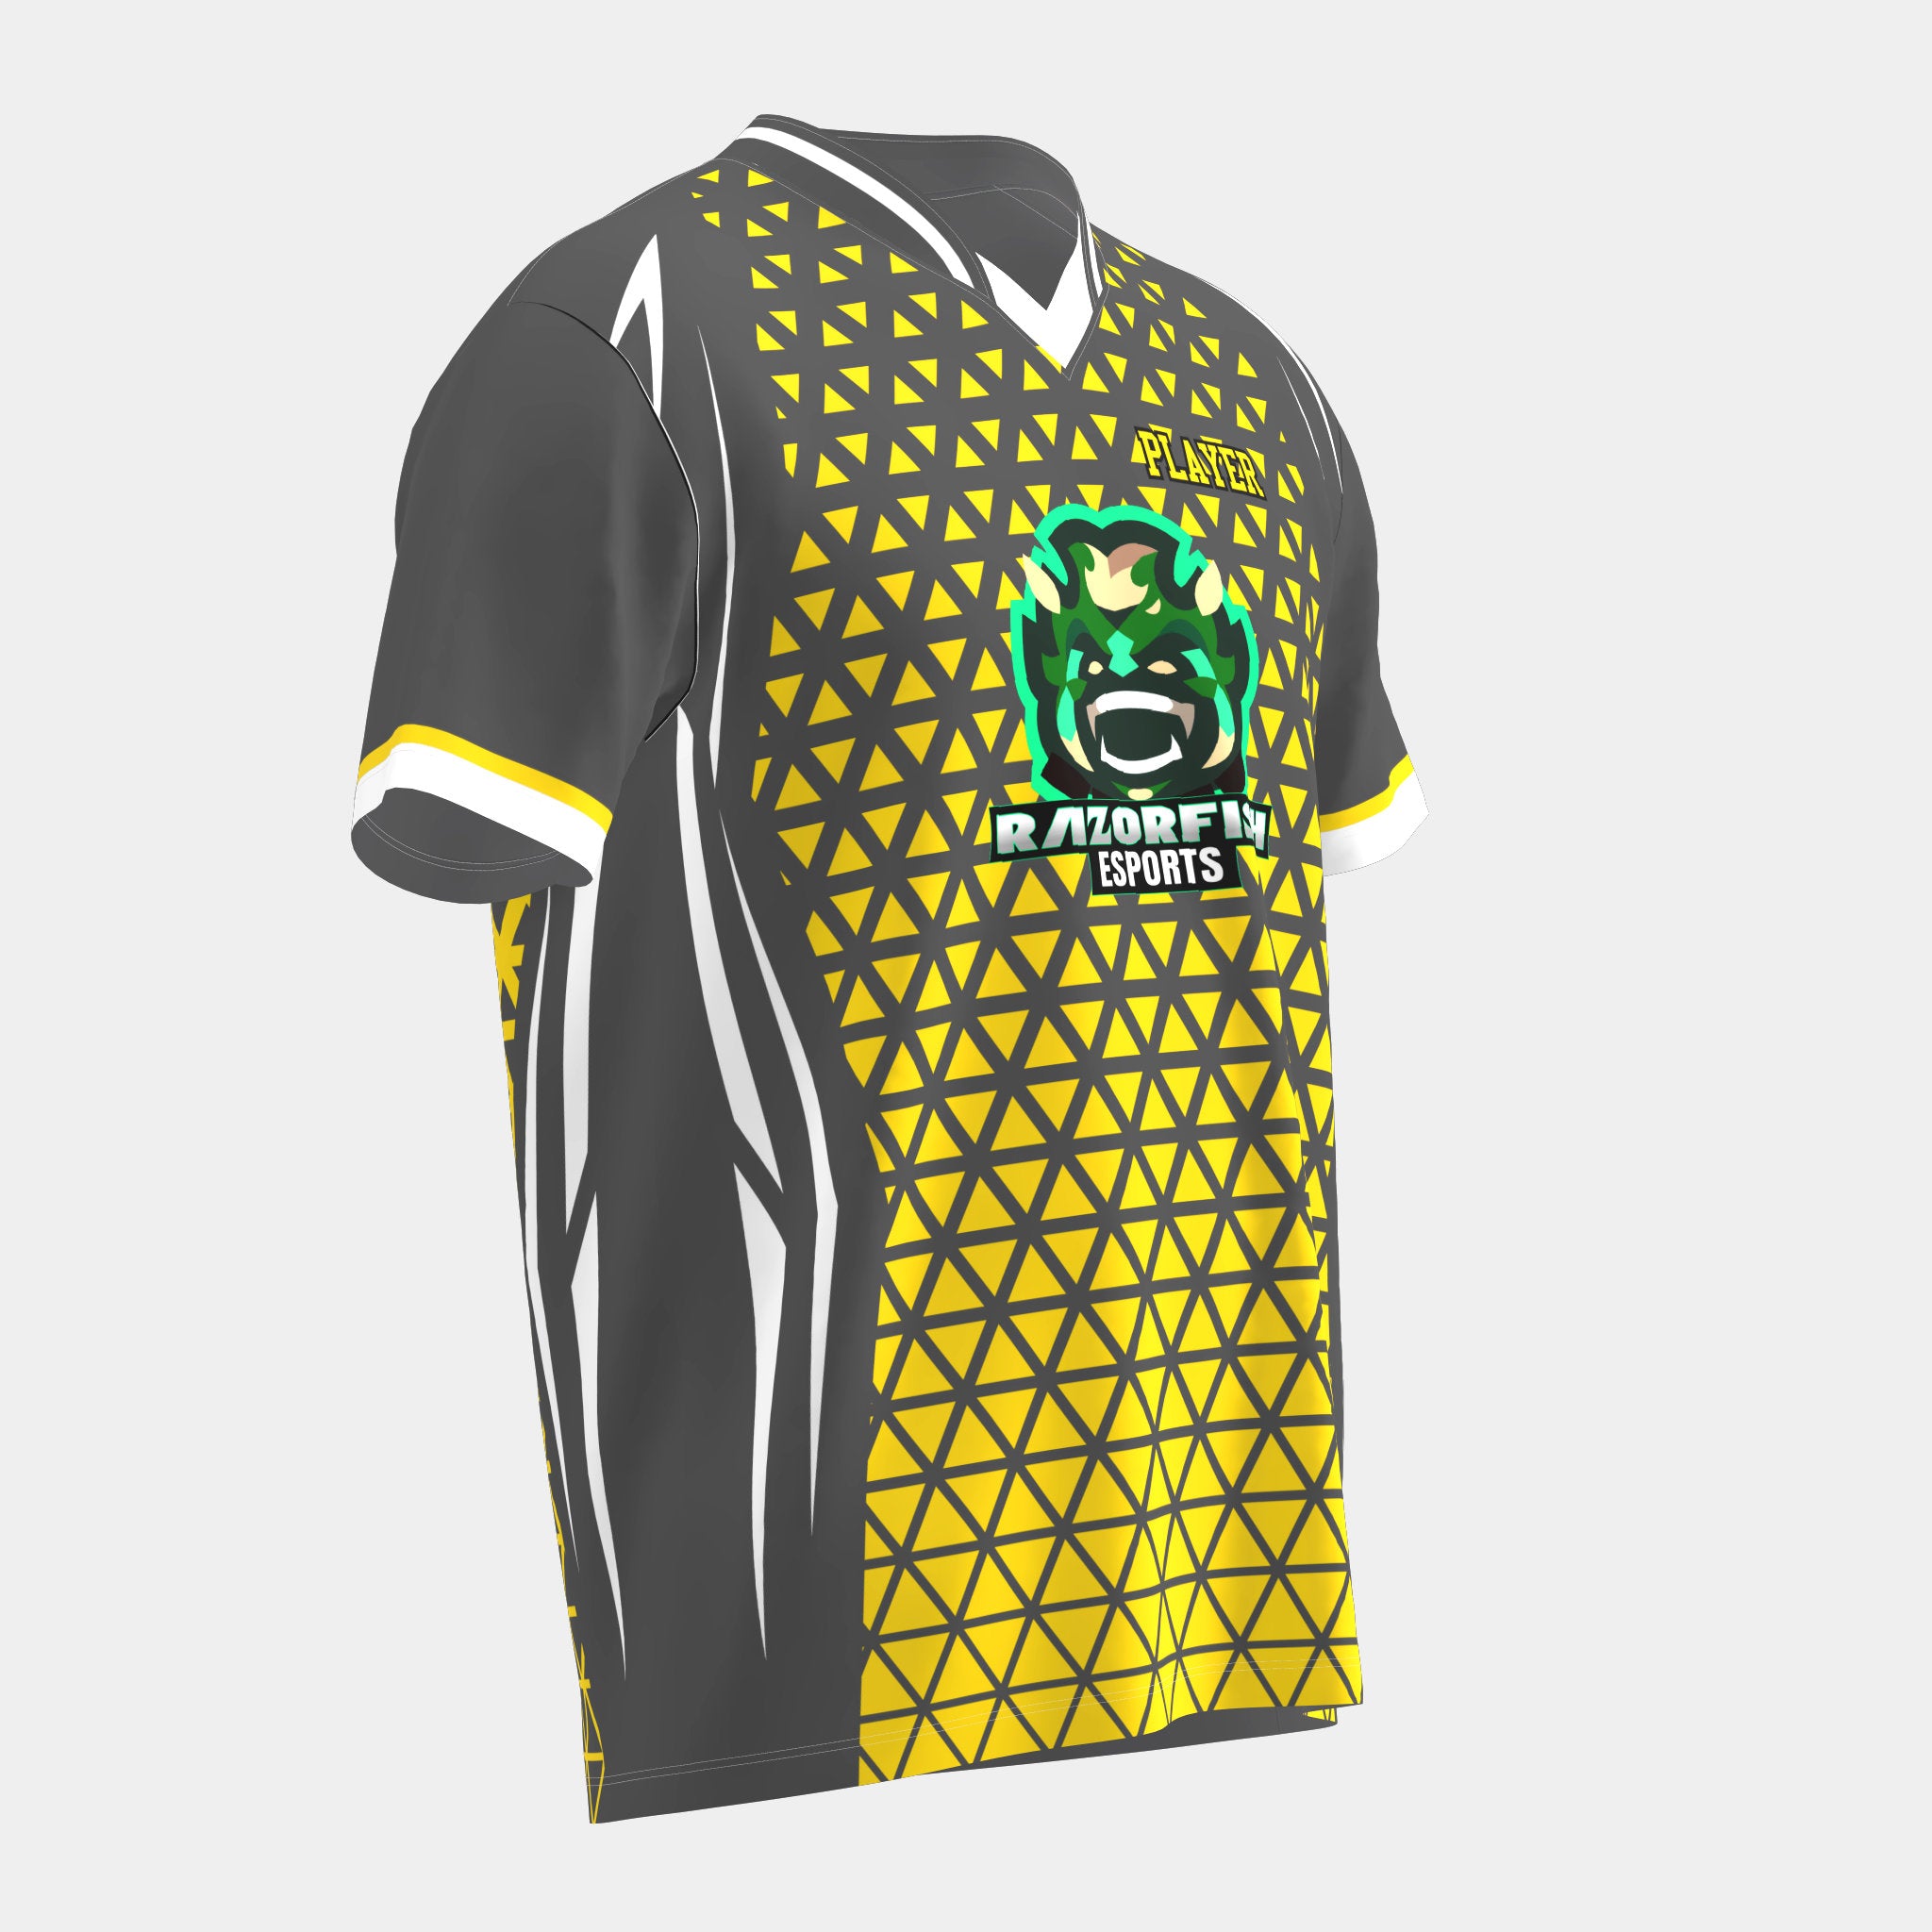 Create your own eSports jersey in our 3D kit designer